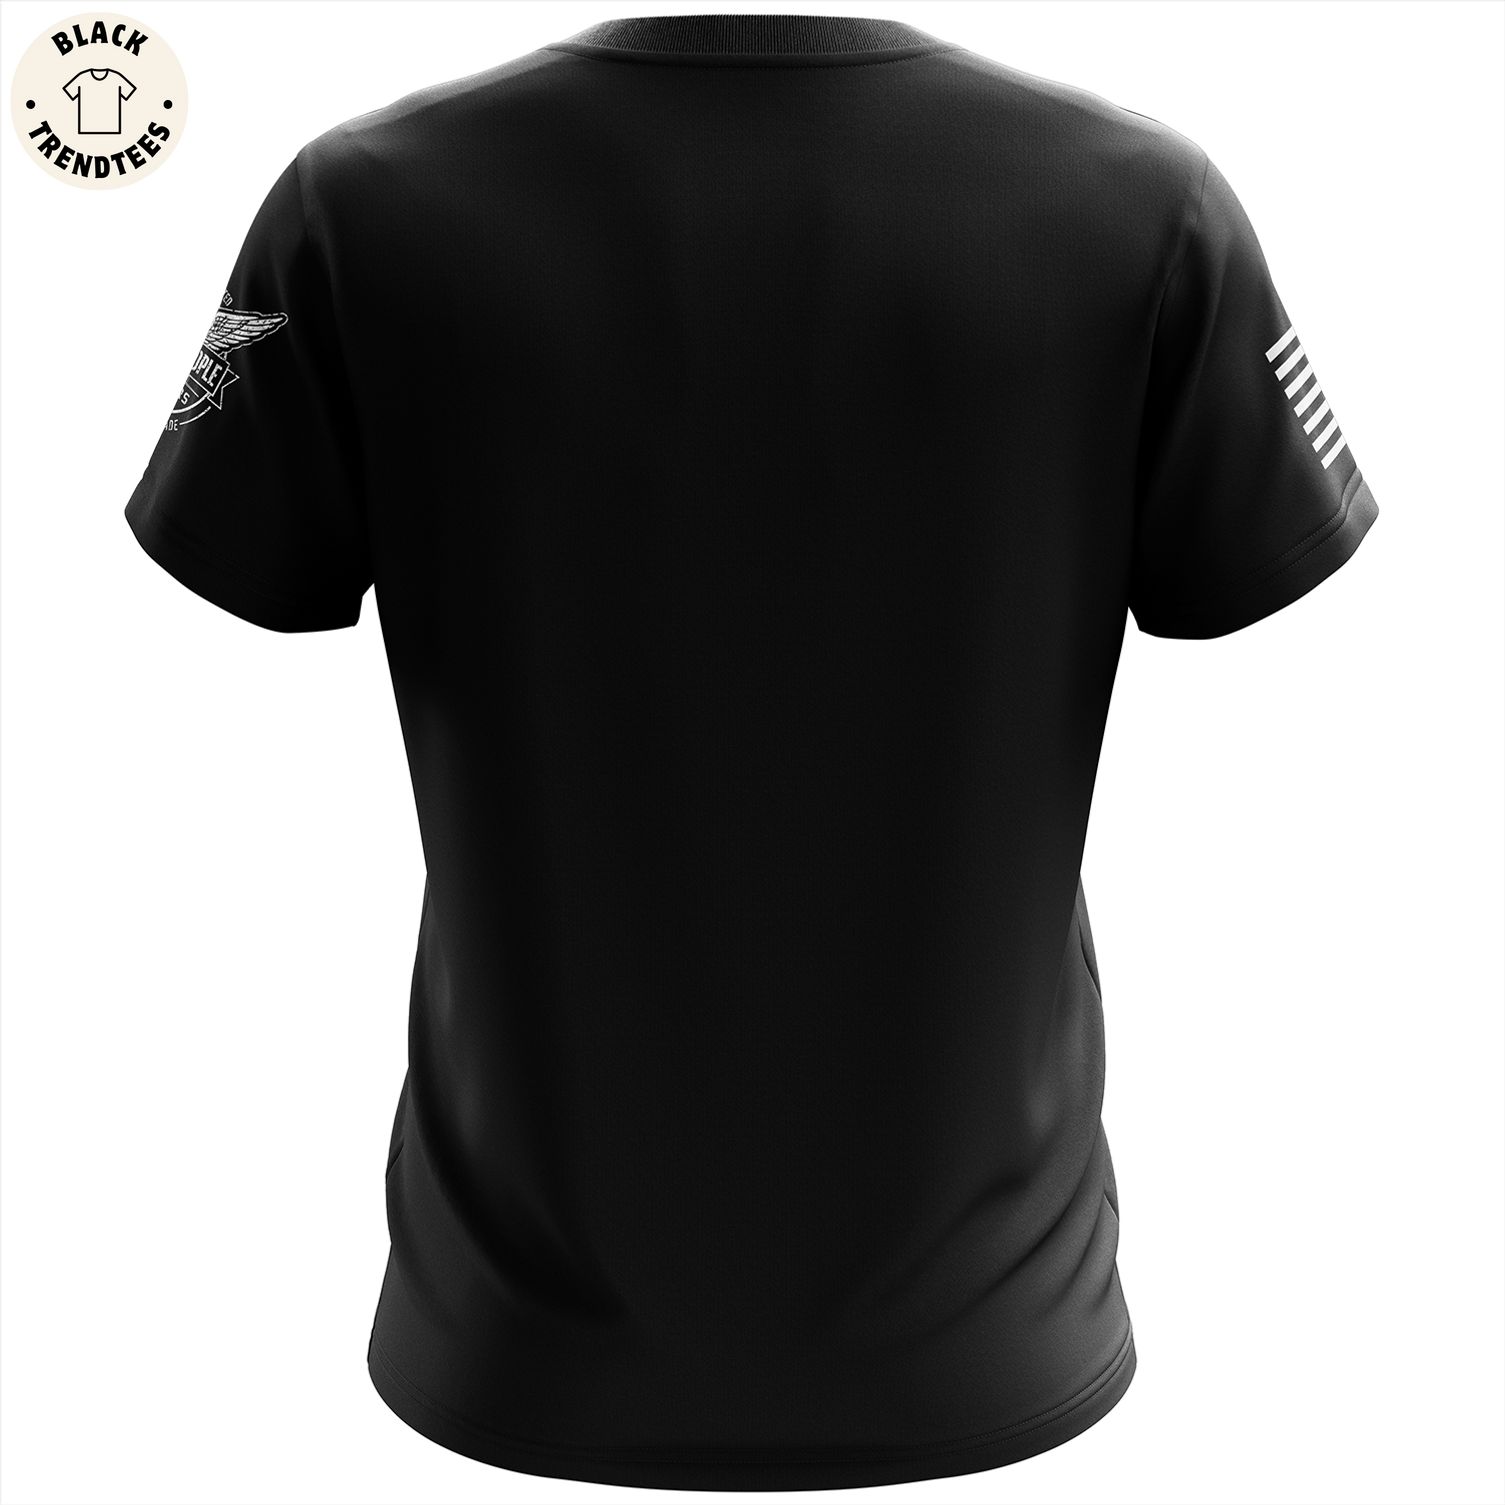 Around And Find Out Colorado Buffaloes Football Black 3D T-Shirt